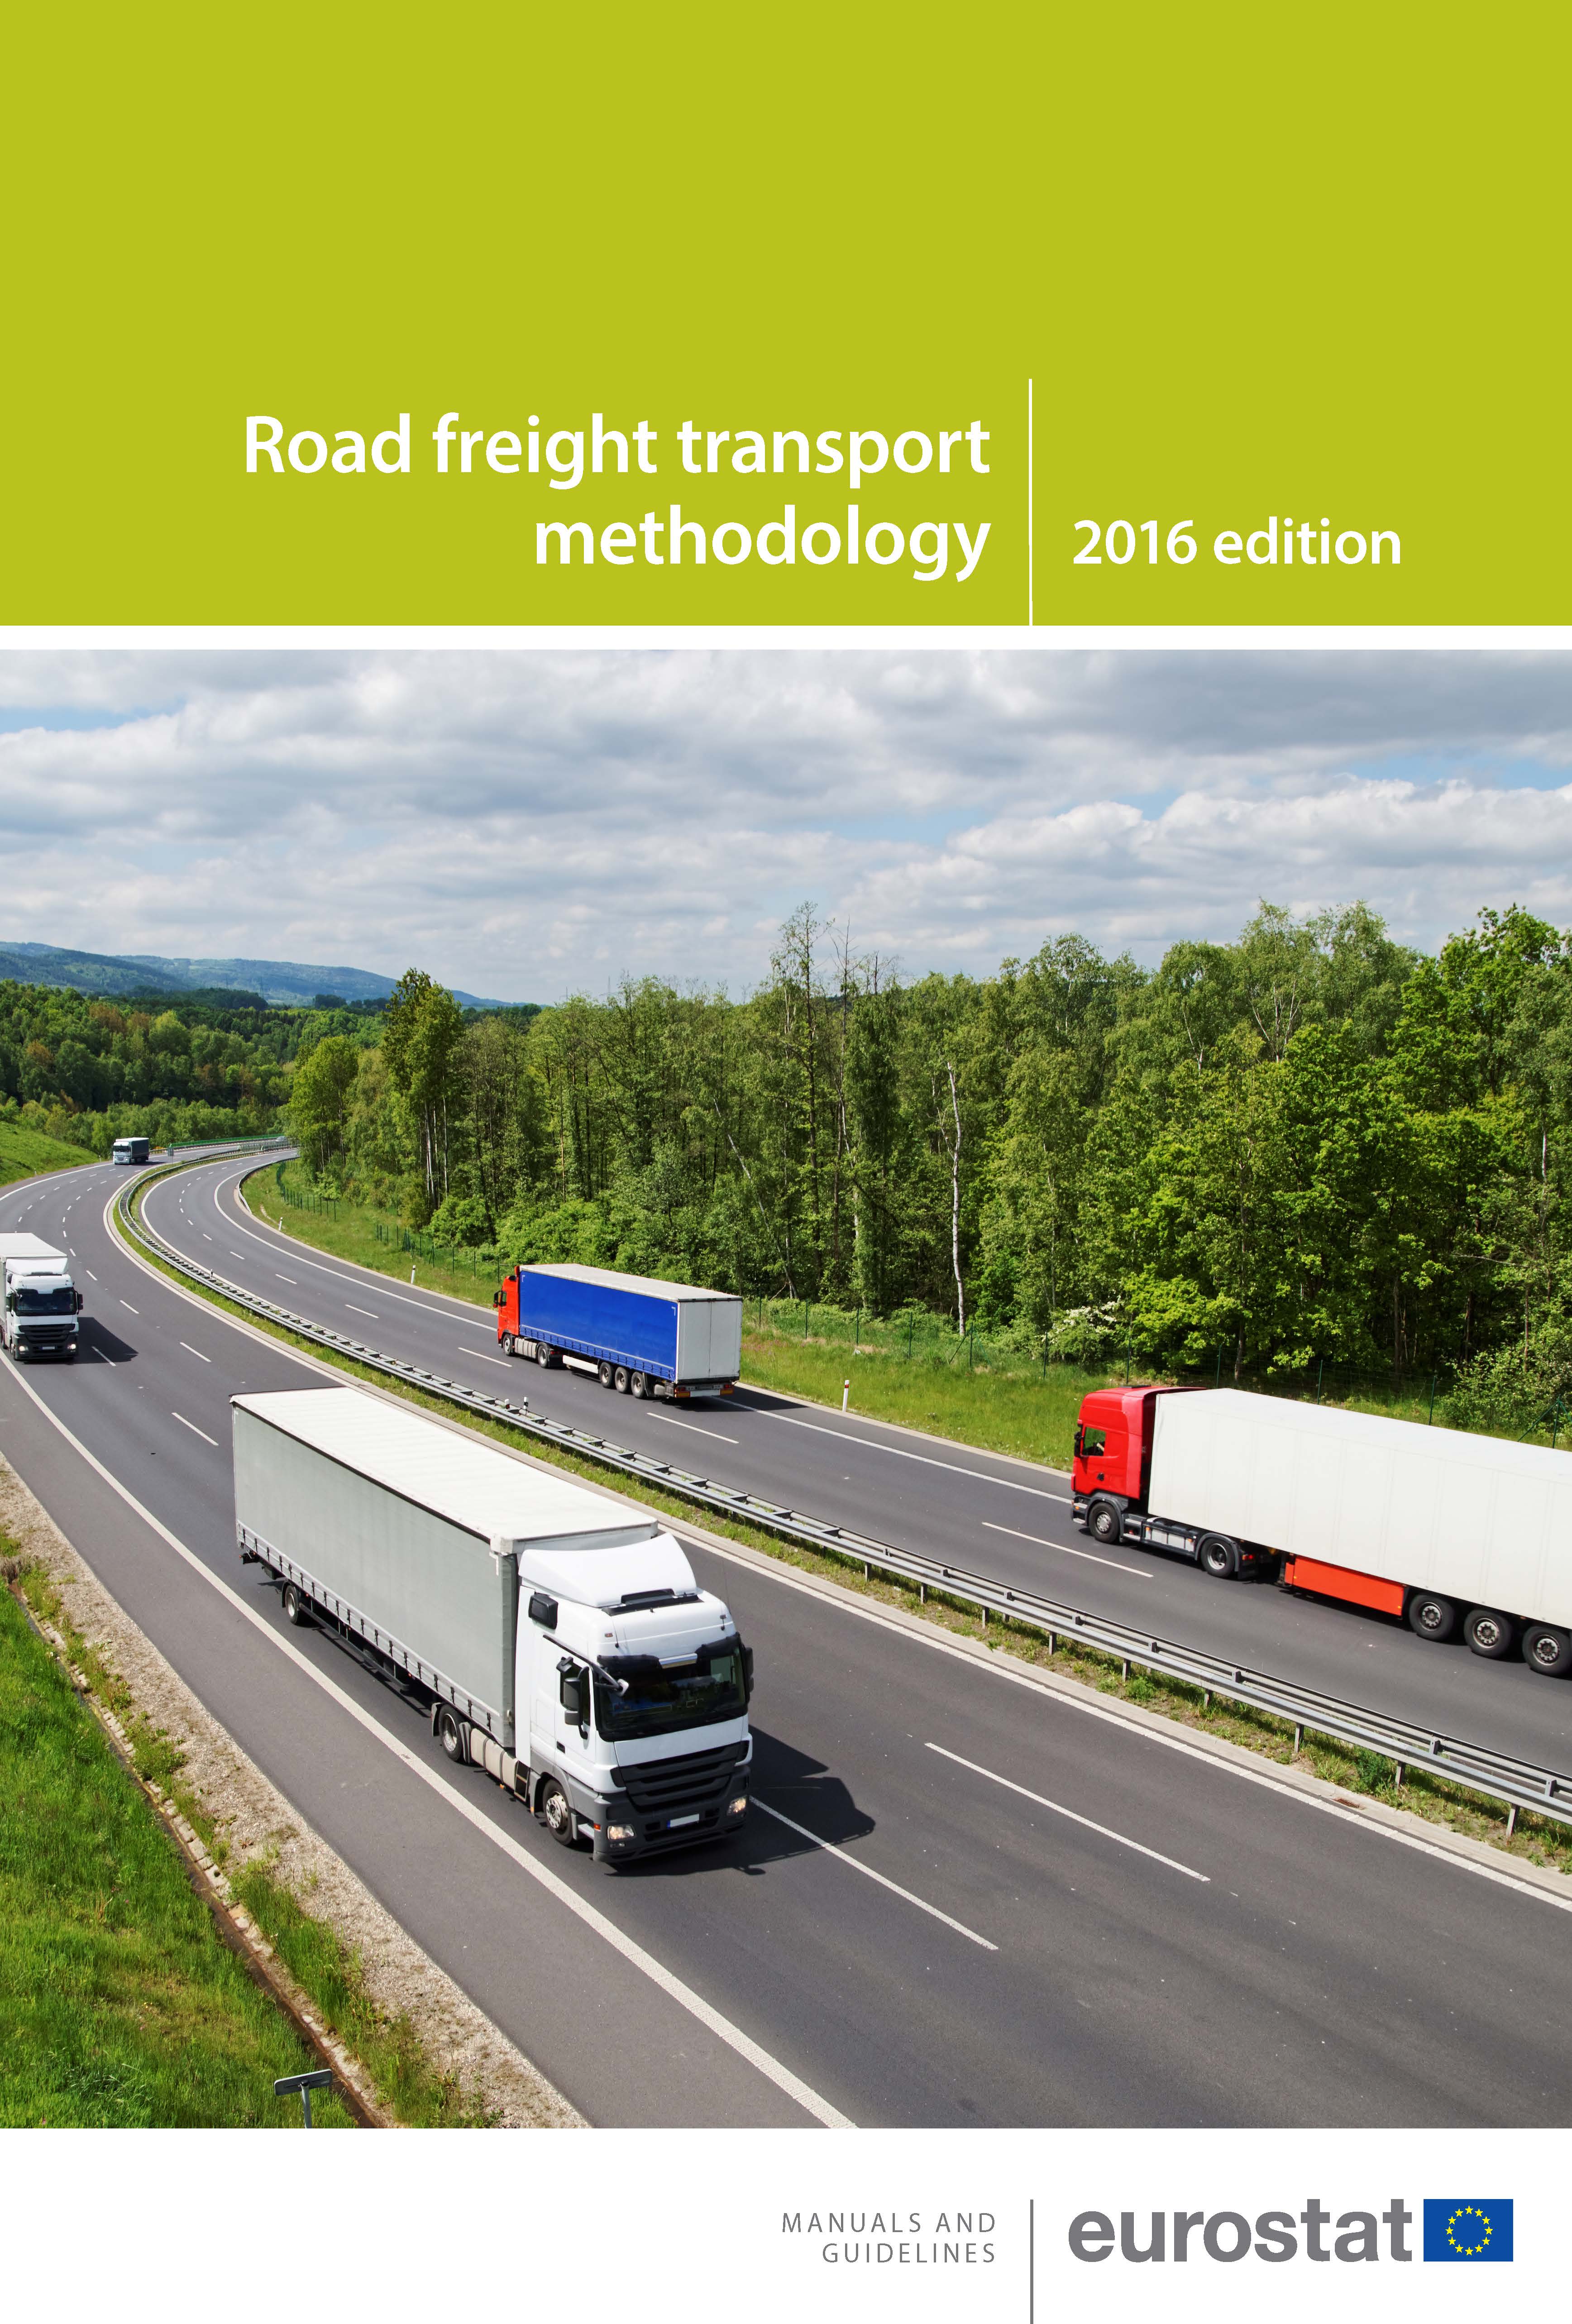 Road freight transport methodology — 2016 edition (Revised edition, August 2017)